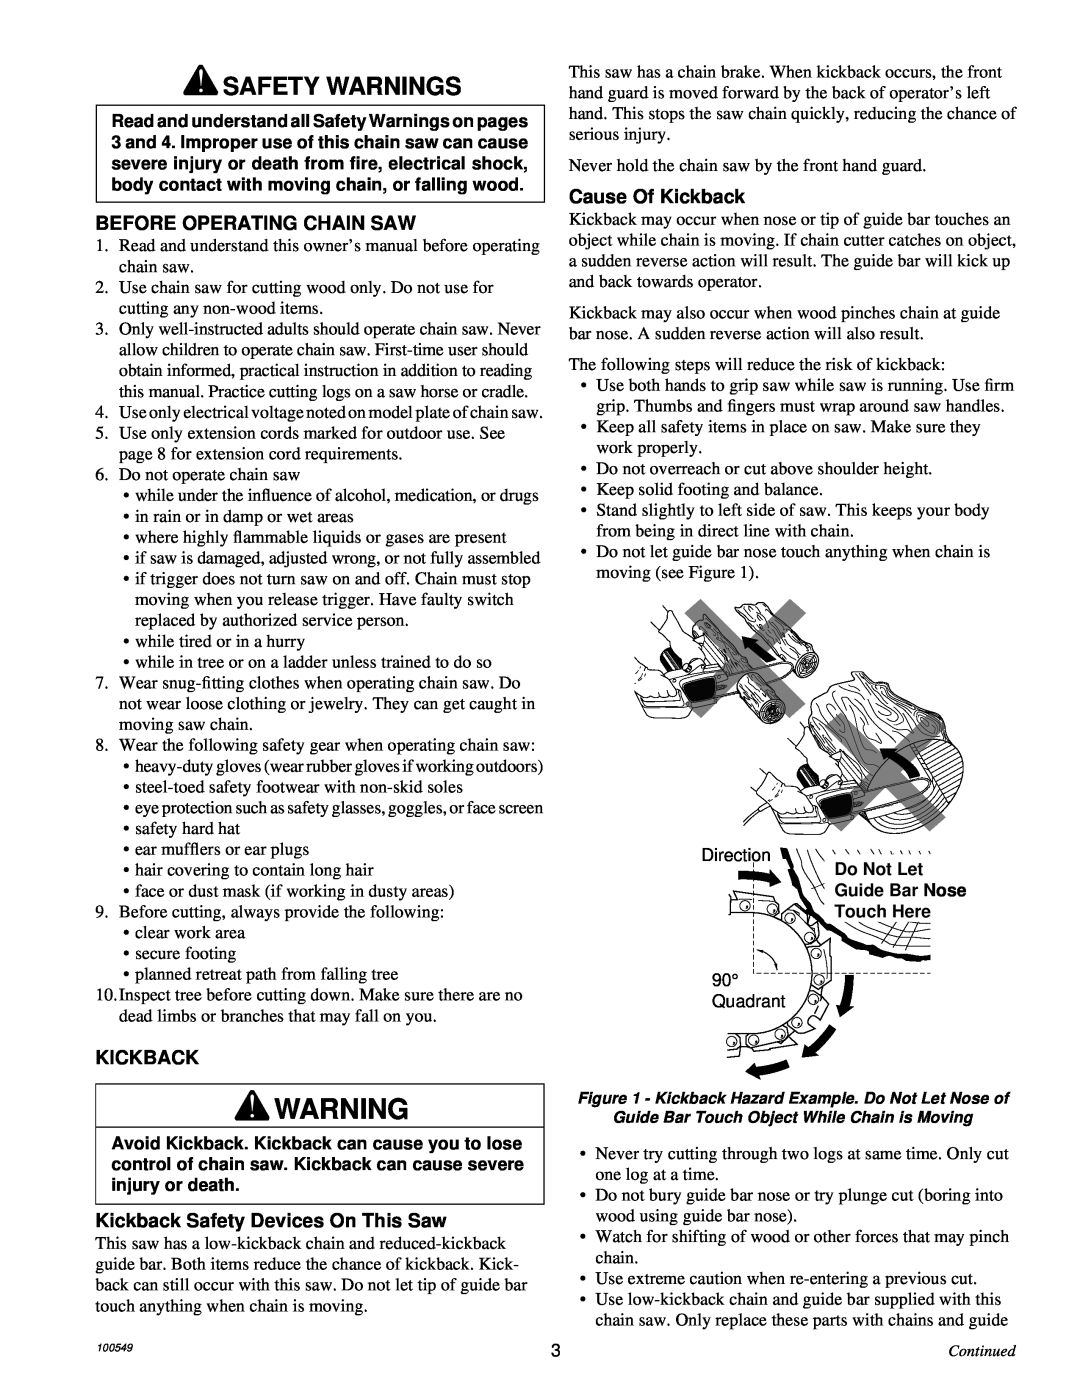 MasterCraft 100524-01, CS-120CB owner manual Safety Warnings, Before Operating Chain Saw, Cause Of Kickback 